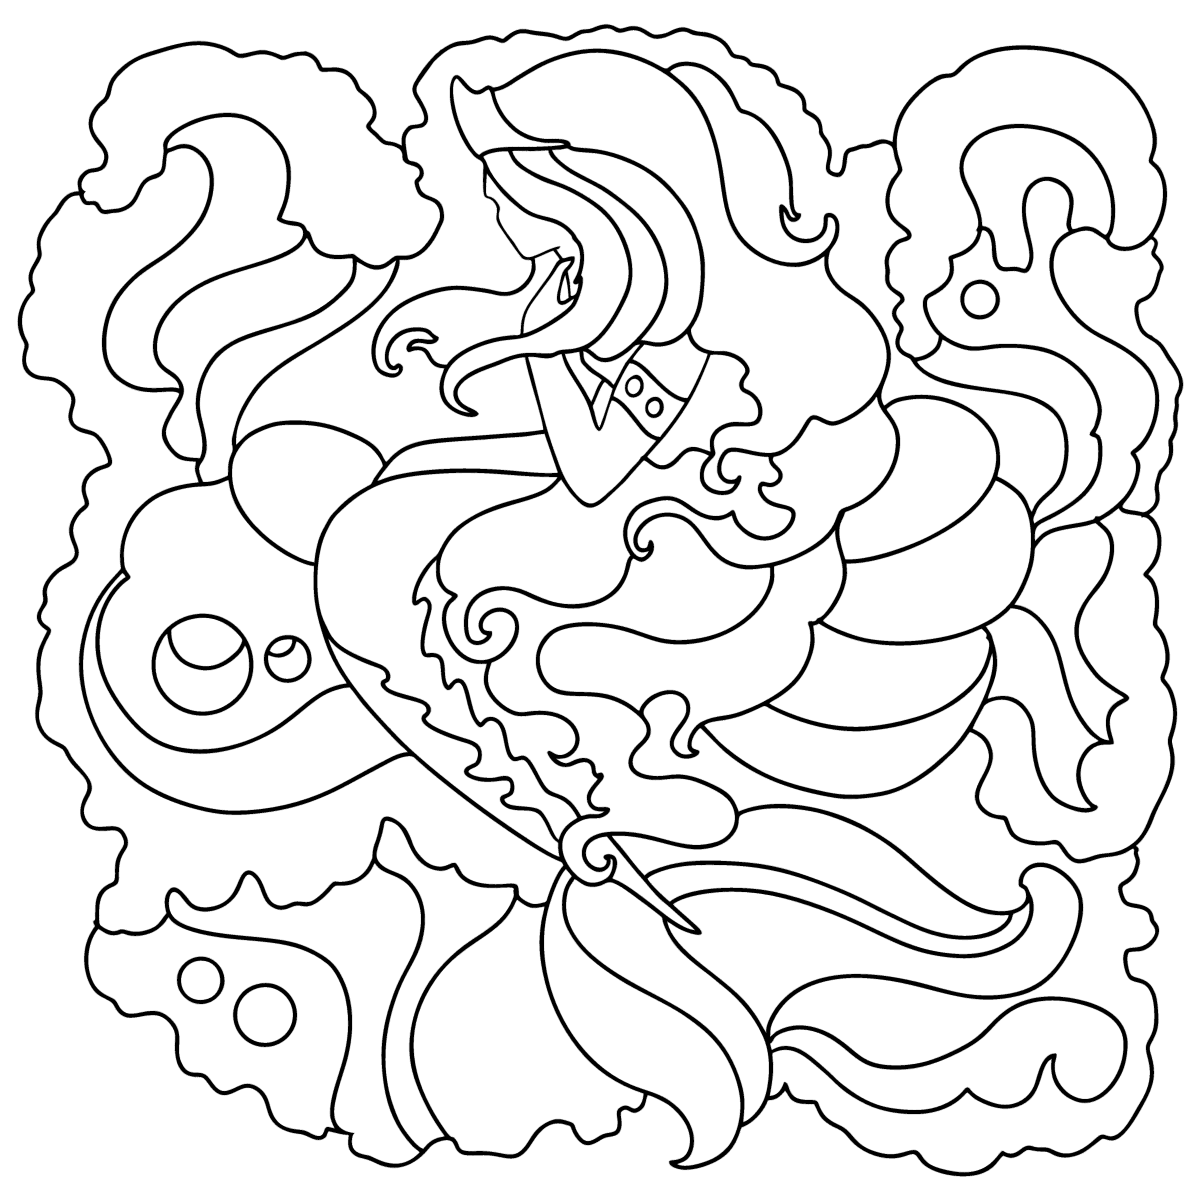 mermaid-coloring-pages-for-adults